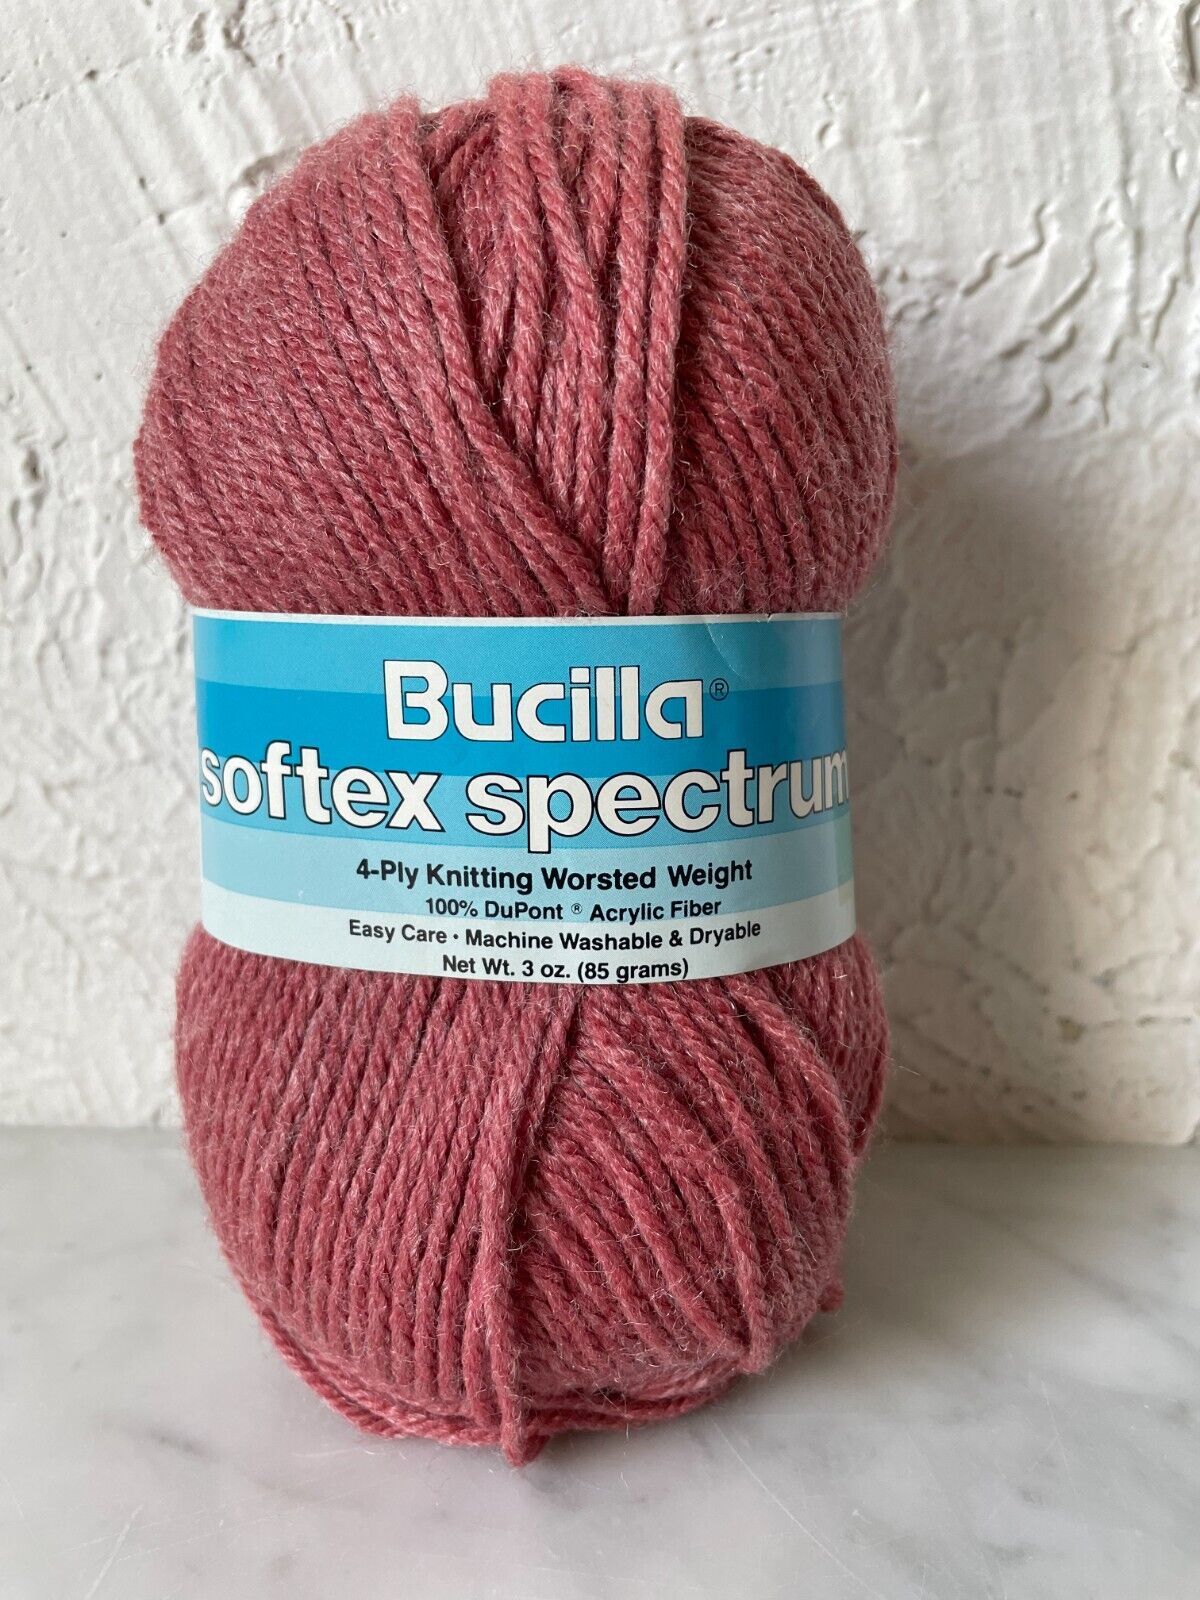 Primary image for Vintage Bucilla Softex Spectrum 4 Ply Worsted Weight Yarn - 1 Skein Rose #1393